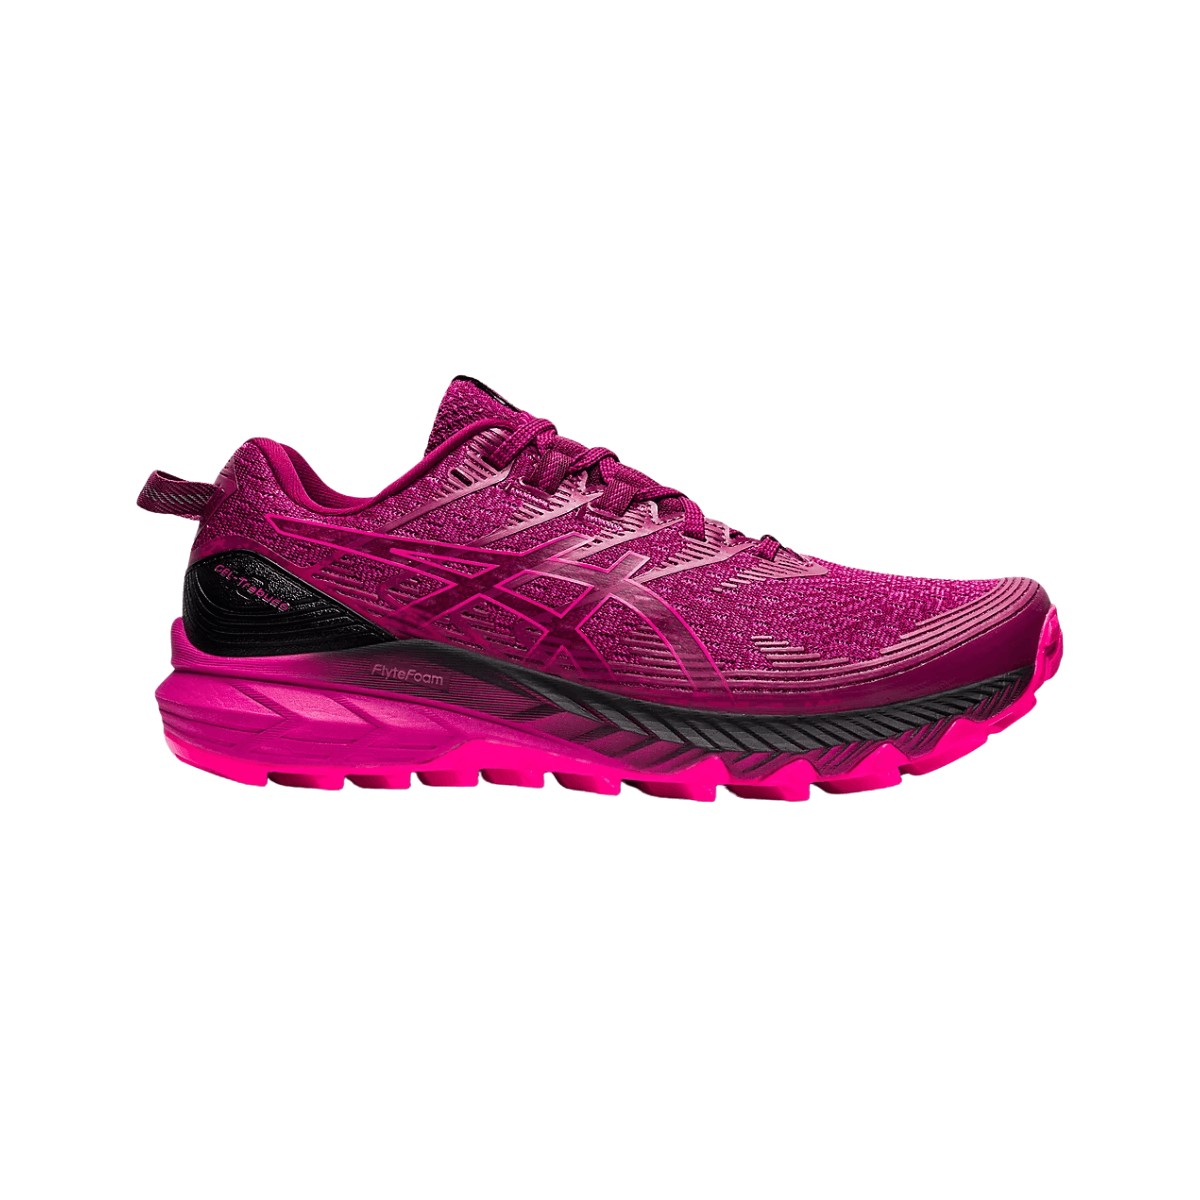 Chaussures Asics Gel-Trabuco 10 Noir Violet AW22 Femme, Taille 40,5 - EUR